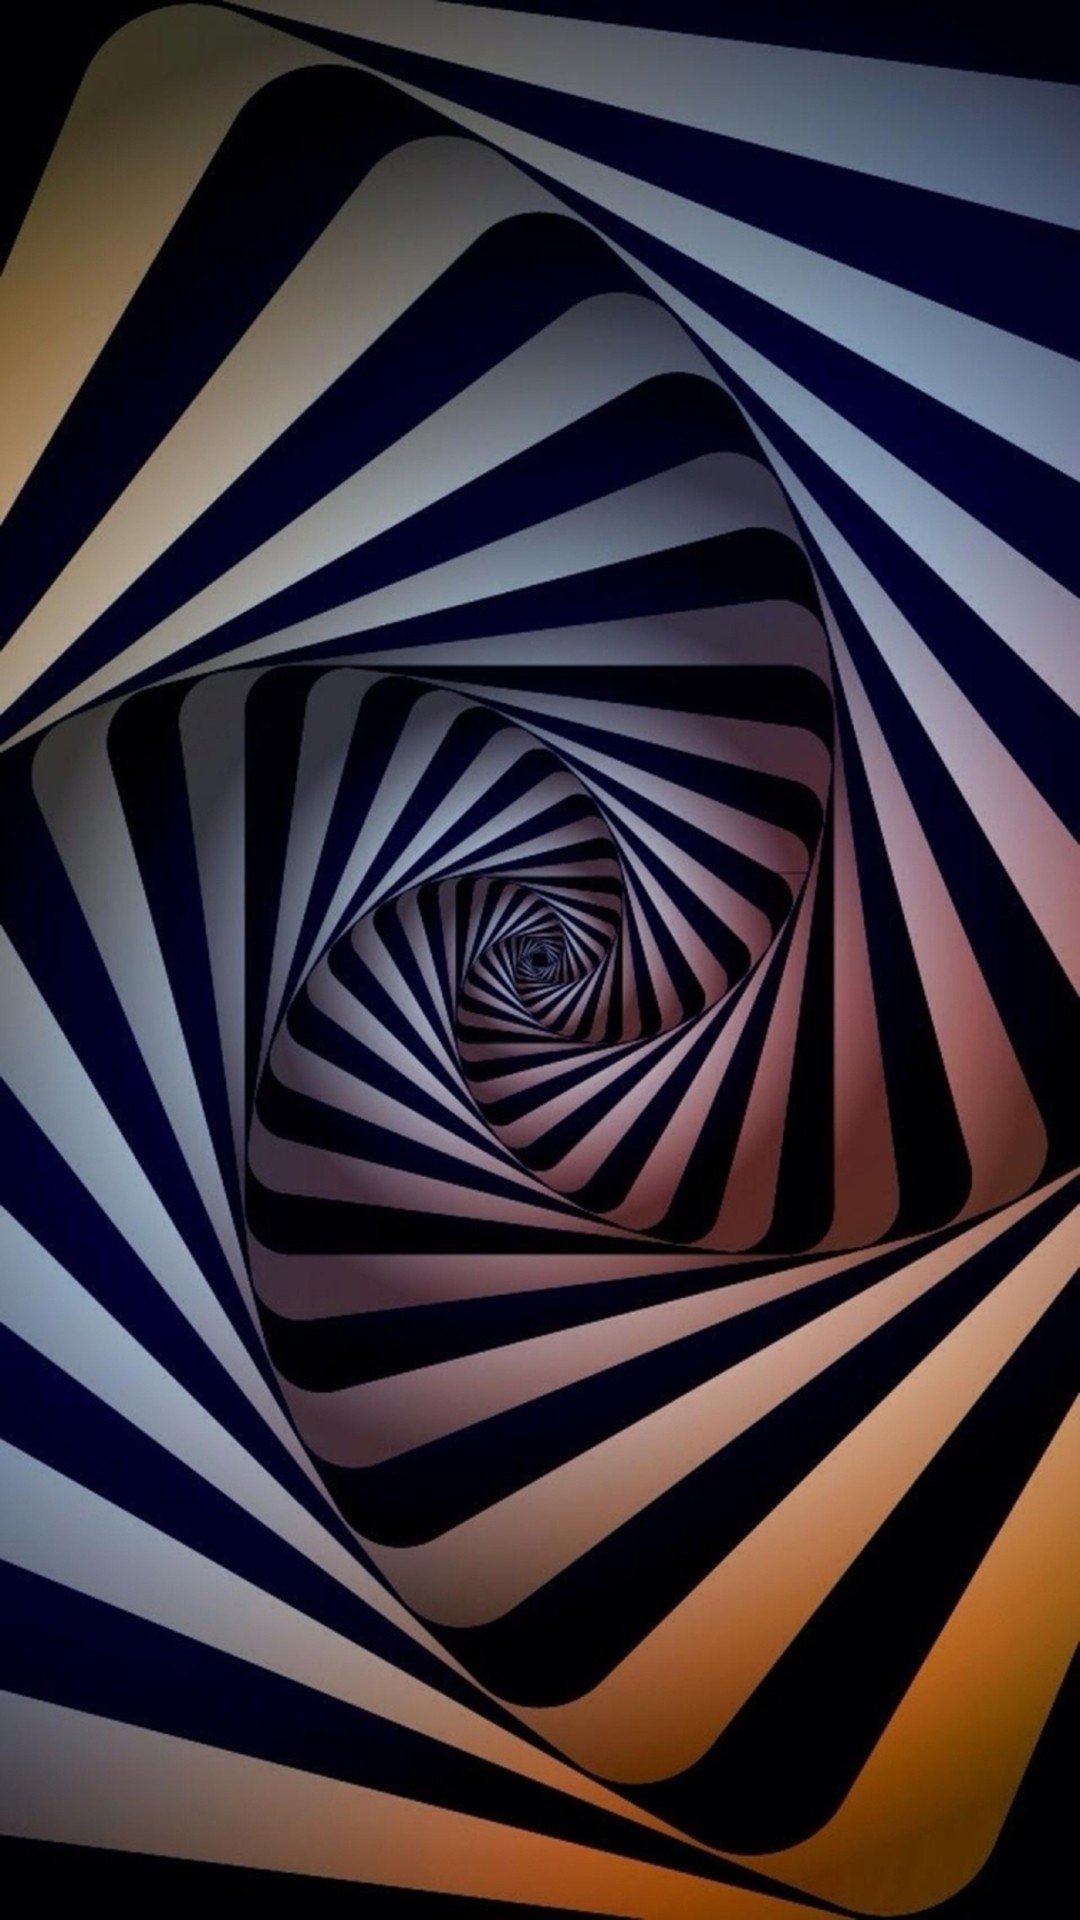 Abstract Swirl Dimensional 3d Iphone 6 Wallpaper Desktop Images